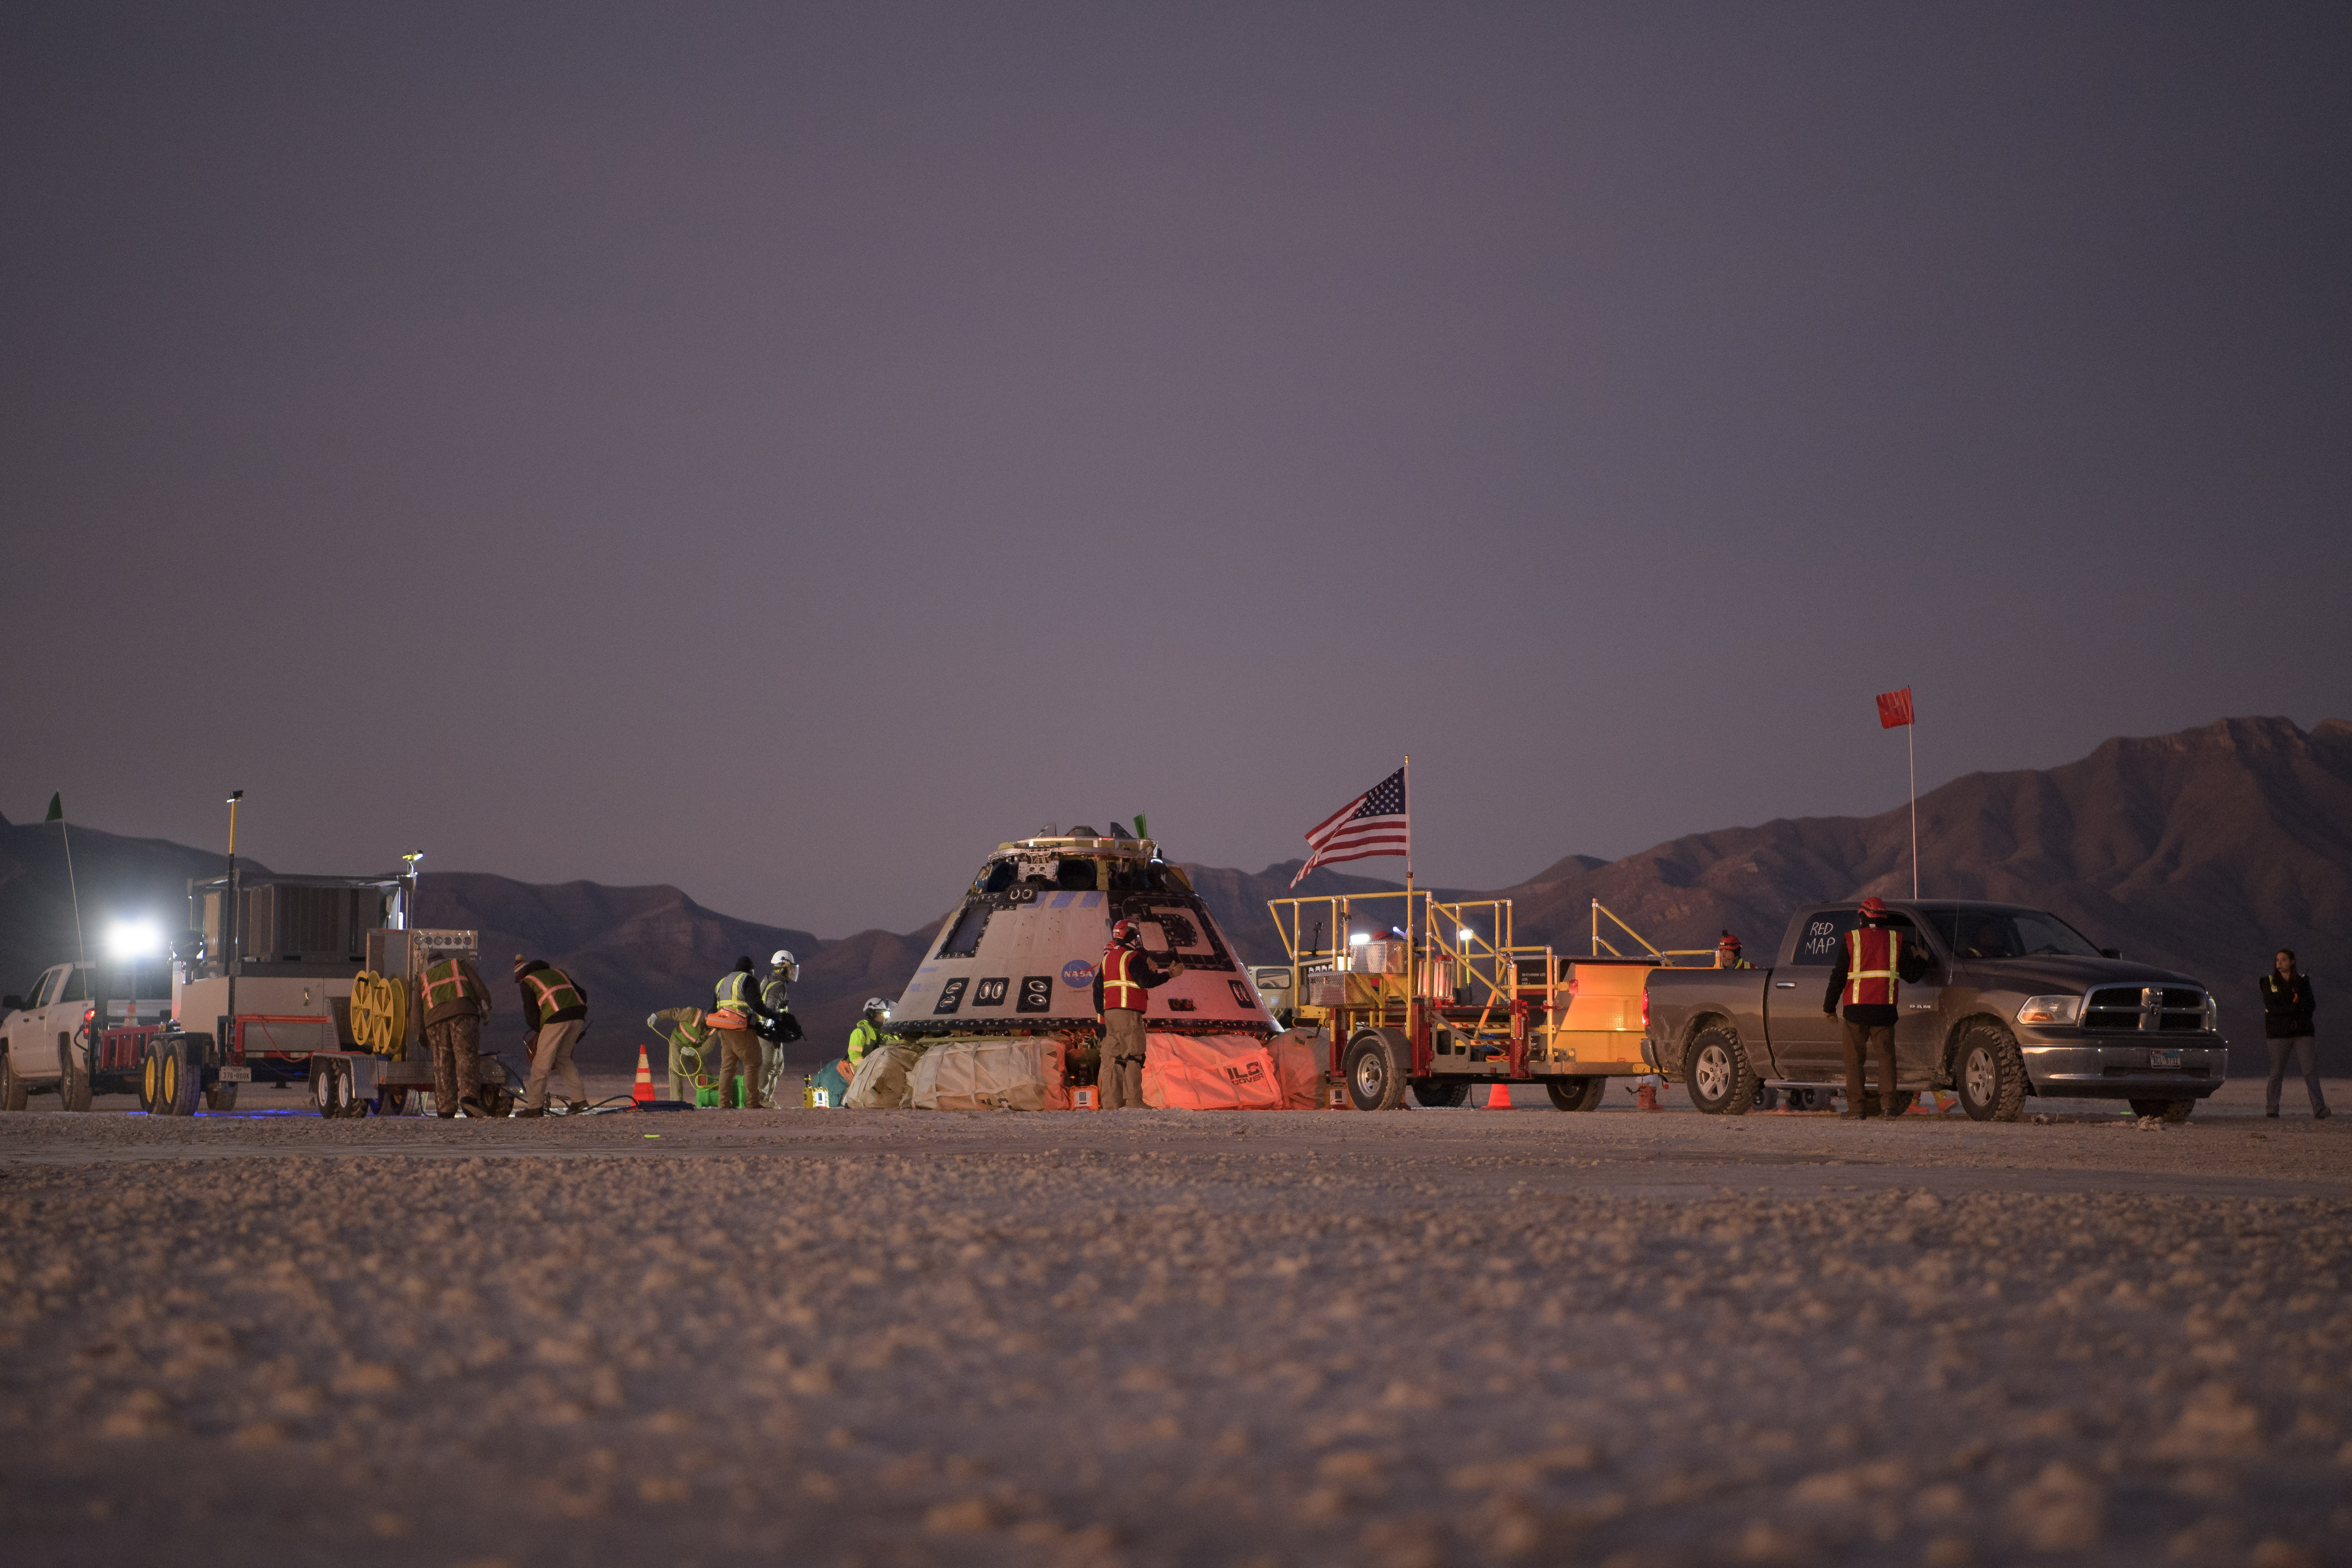 Boeing, NASA, and U.S. Army personnel work around the Boeing Starliner spacecraft shortly after it landed in White Sands, New Mexico, on Sunday.